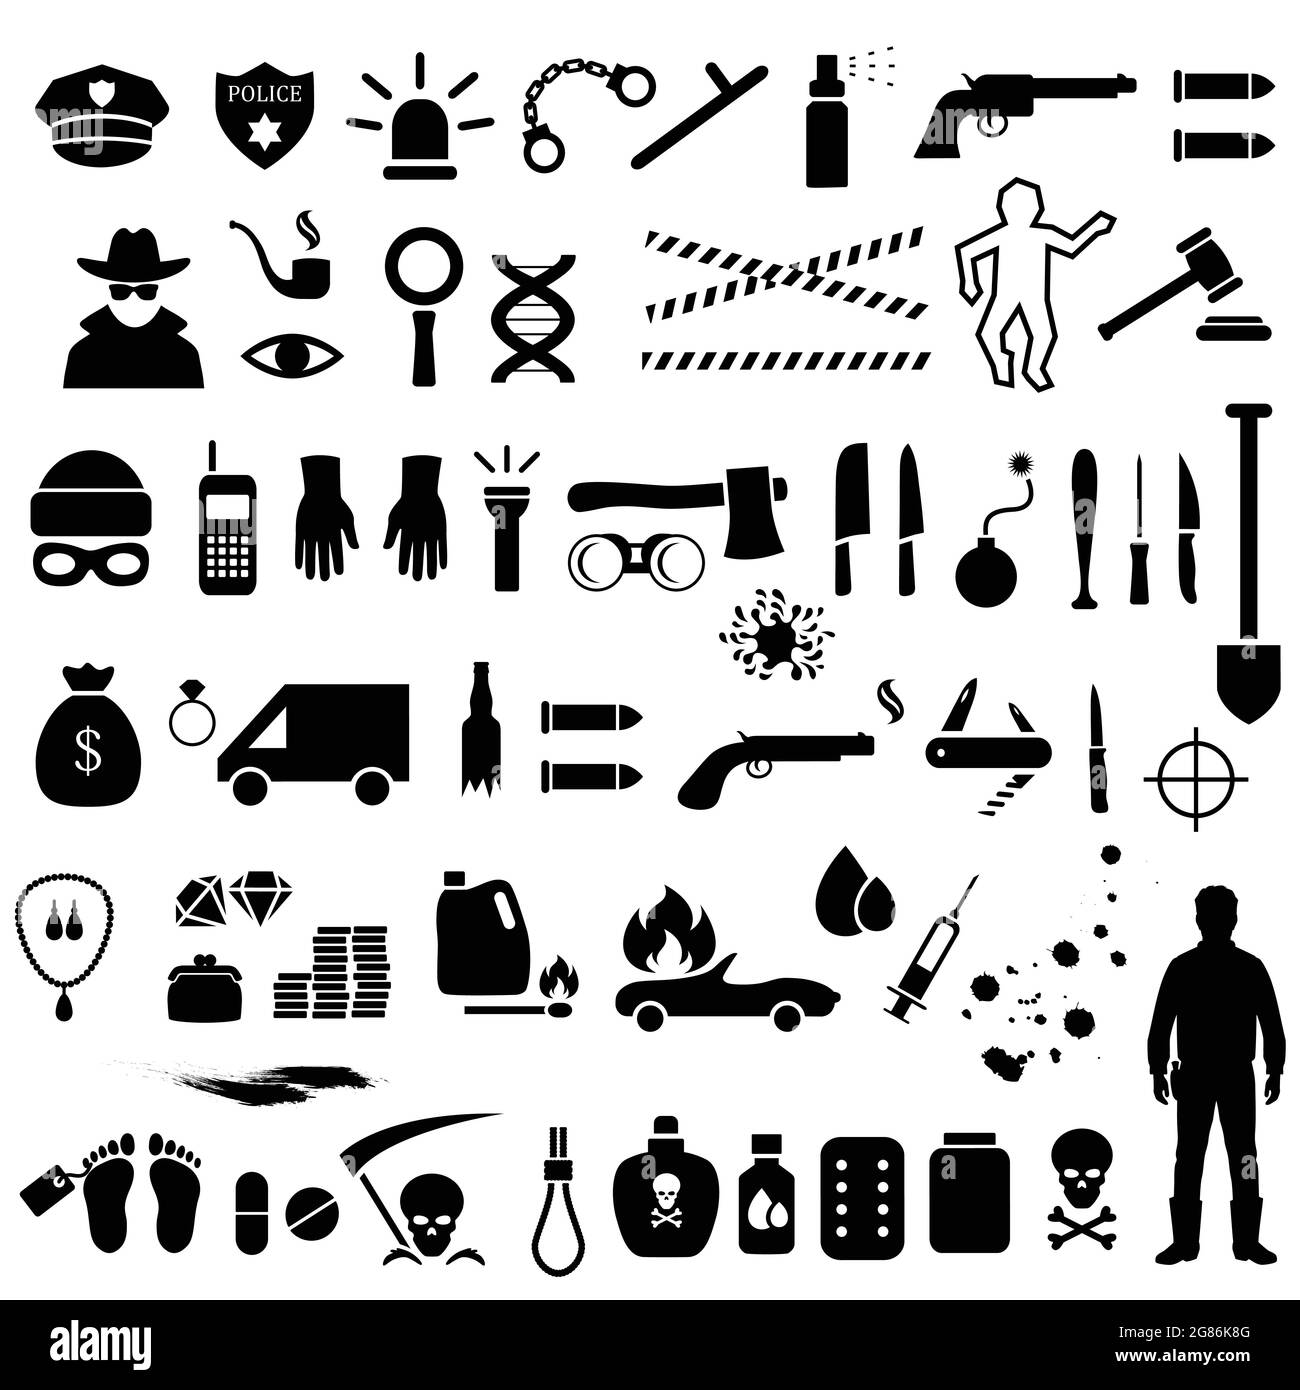 vector crime icons, police, law criminal illustration Stock Vector